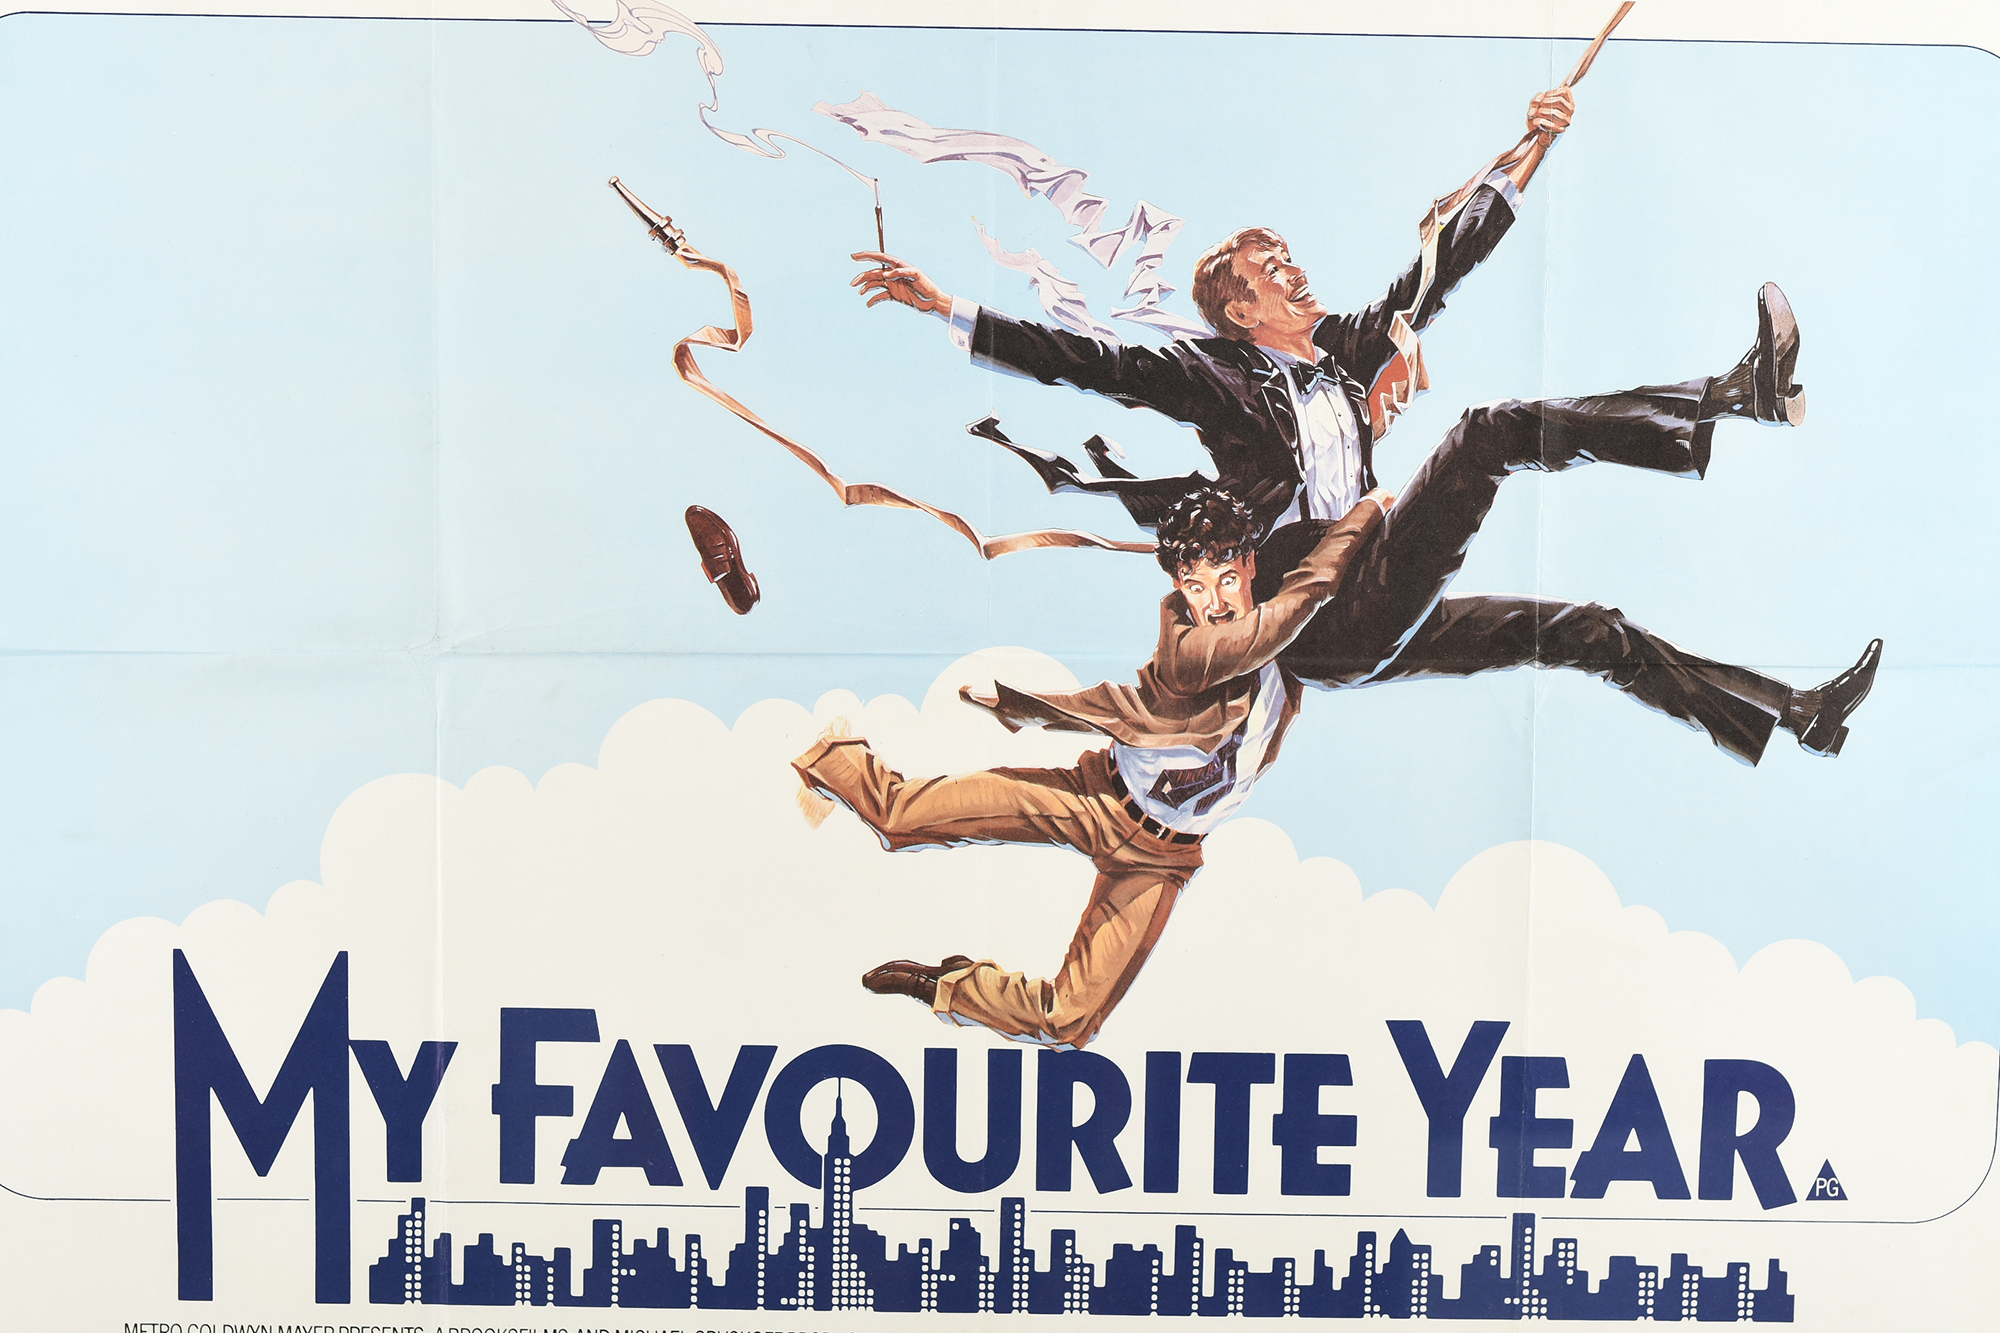 Original 'My Favourite Year' Film Poster - Image 2 of 7